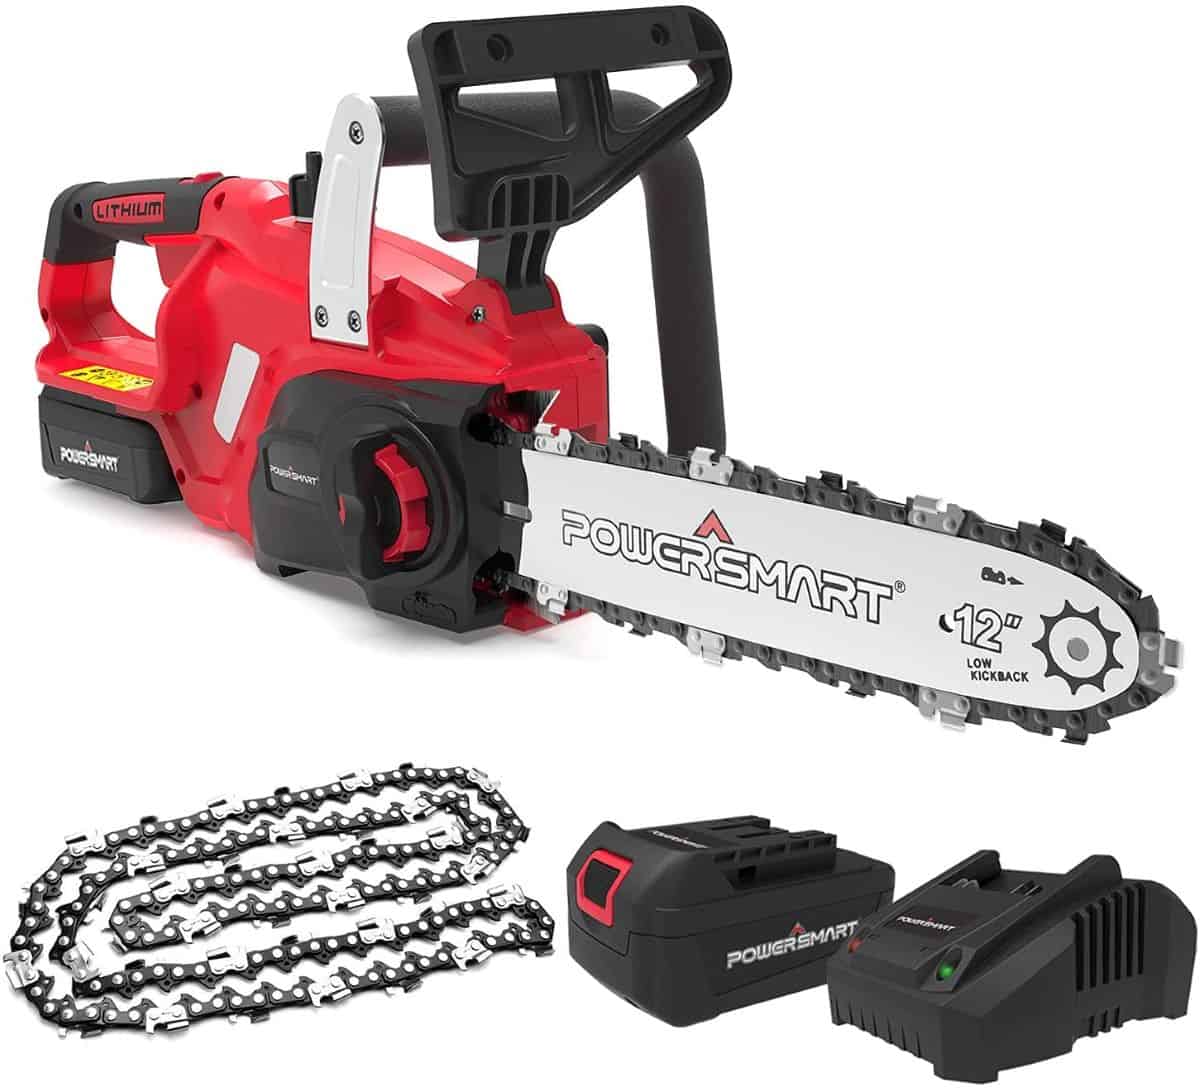 Power Smart cordless electric chainsaw